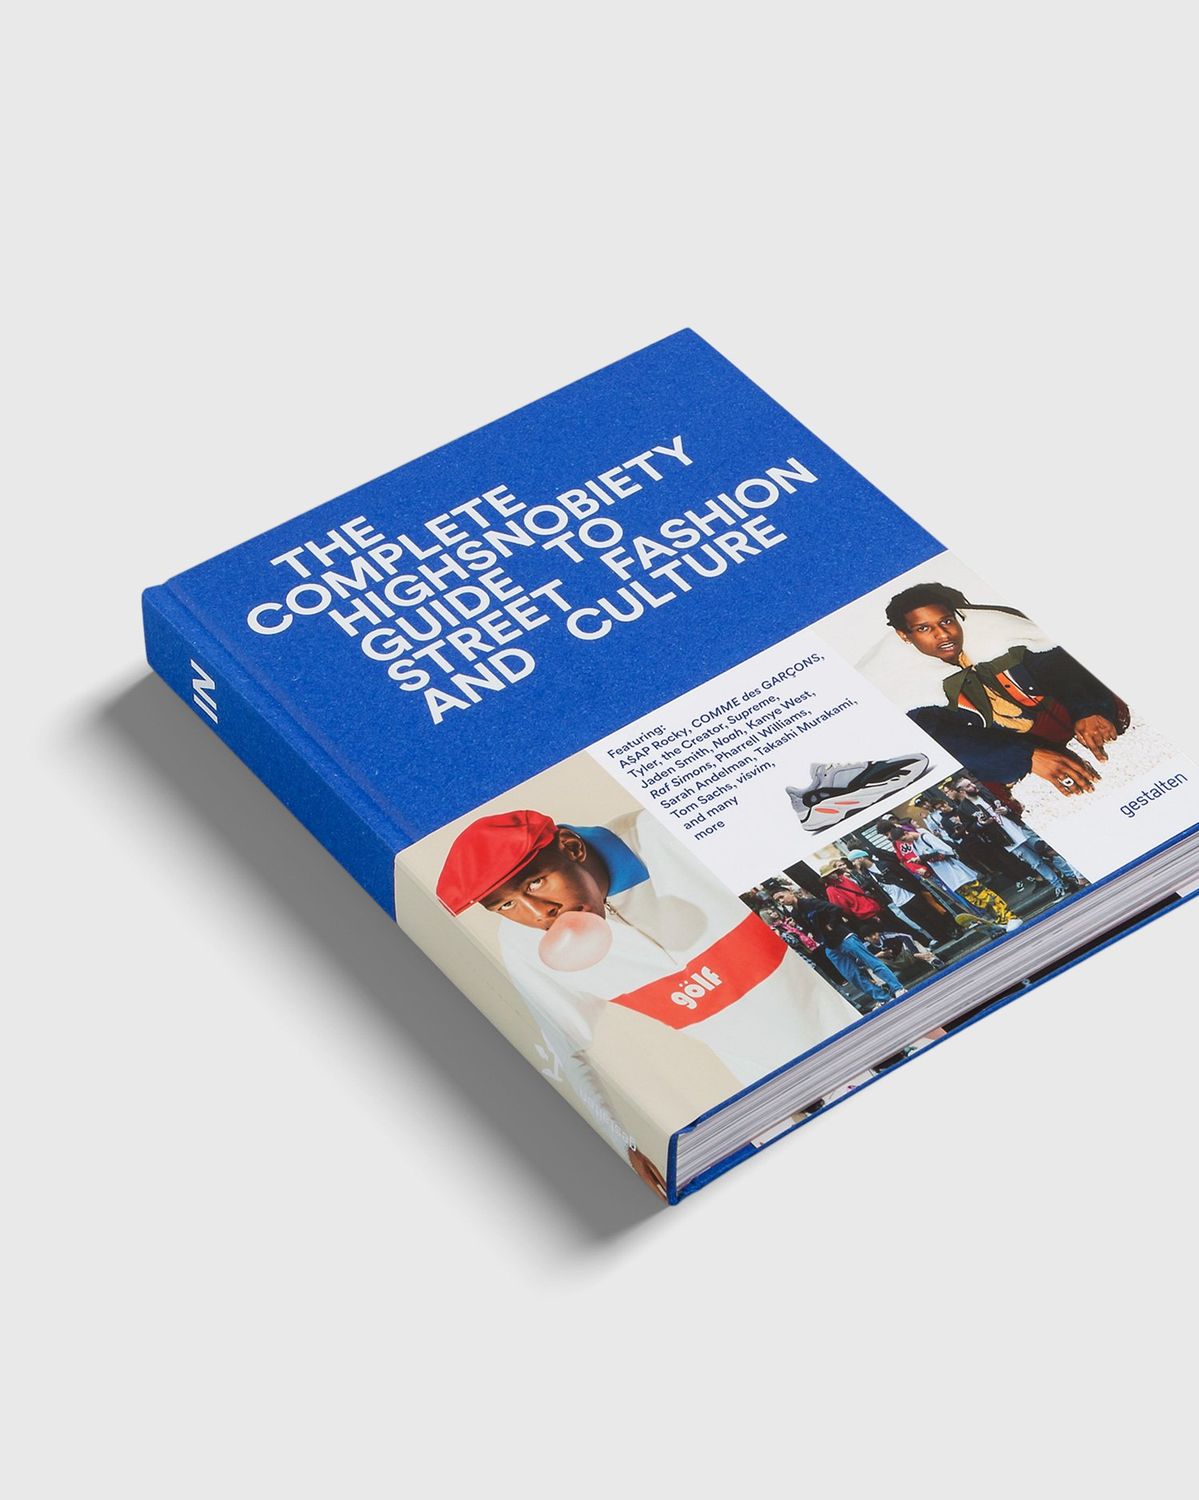 Highsnobiety – THE INCOMPLETE HIGHSNOBIETY GUIDE TO STREET FASHION AND CULTURE - Image 1